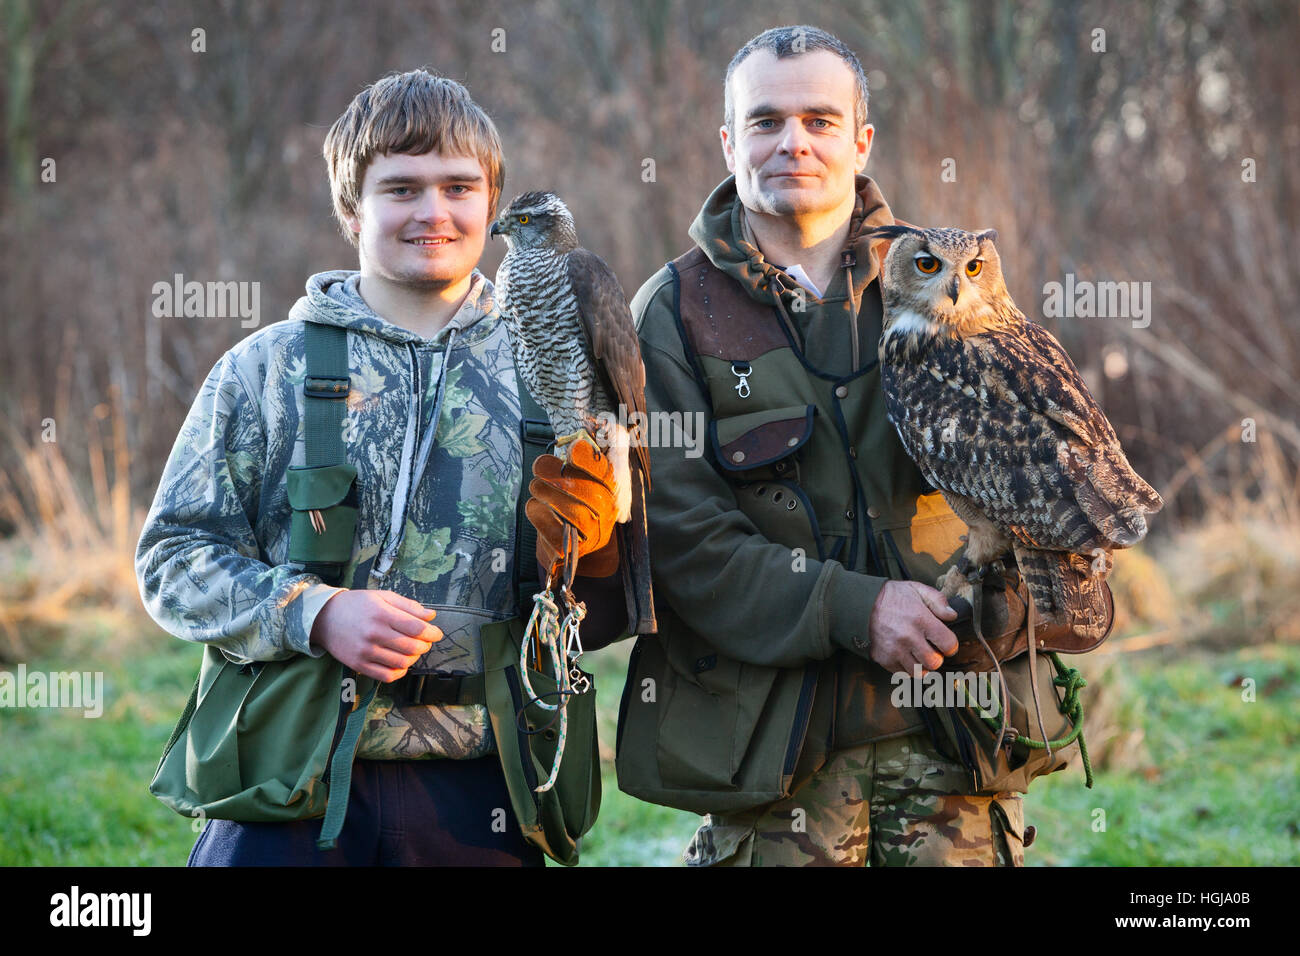 Two falconers in the countryside with their birds of prey, a Goshawk and a Eurasian Eagle Owl. UK. Stock Photo